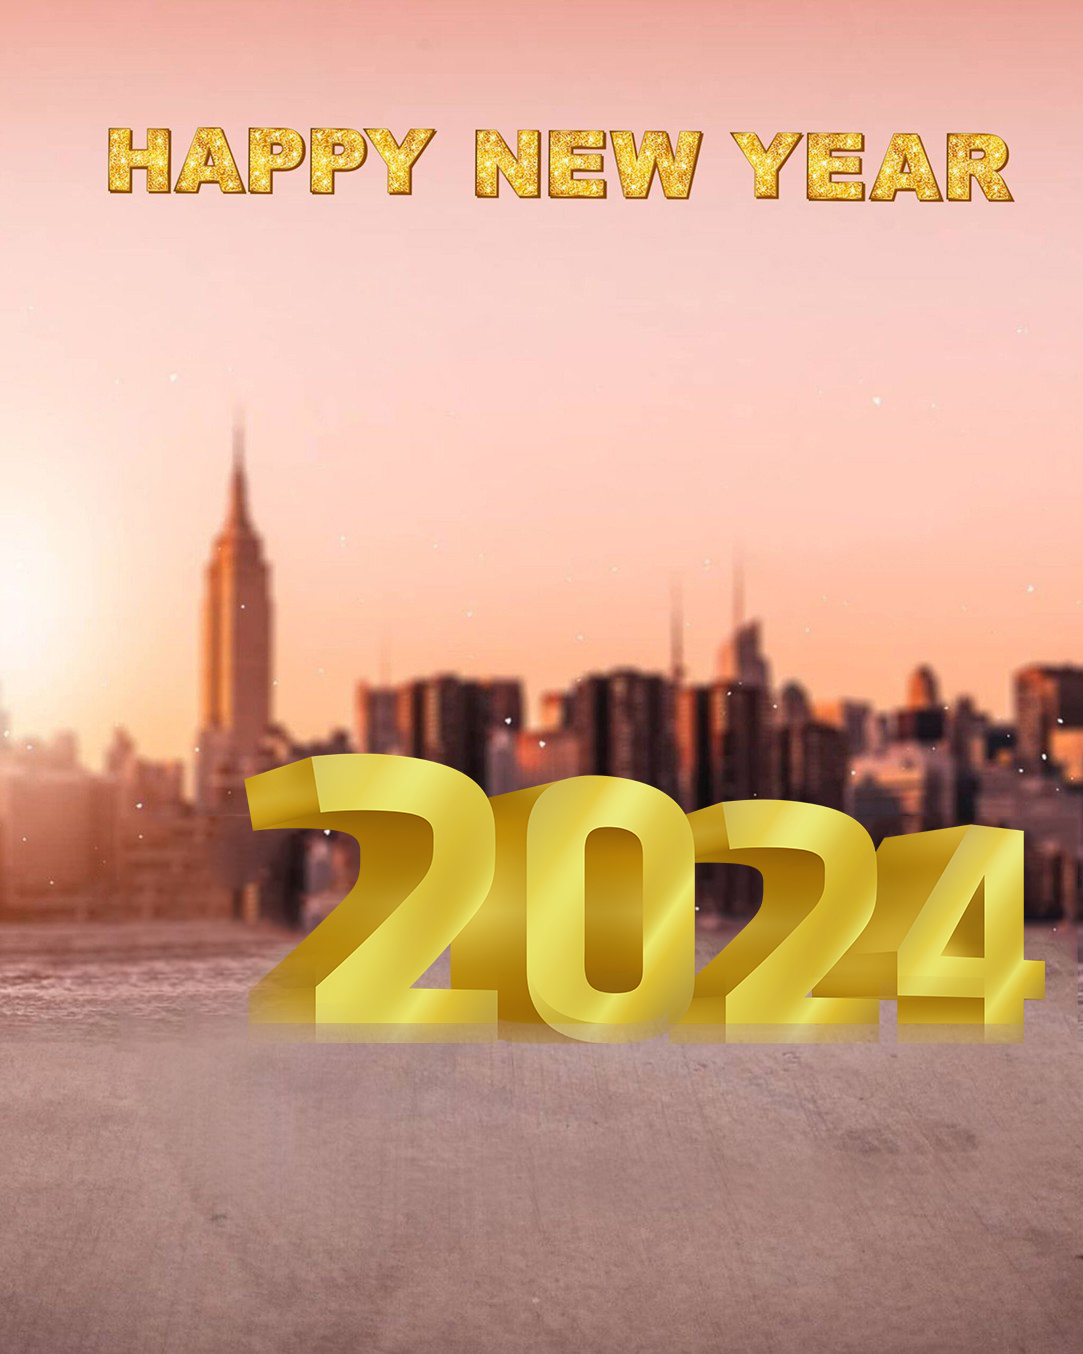 Happy New Year 2024 Pair Of Green Glasses With A City Skyline In The Background Evzb23cbwv 